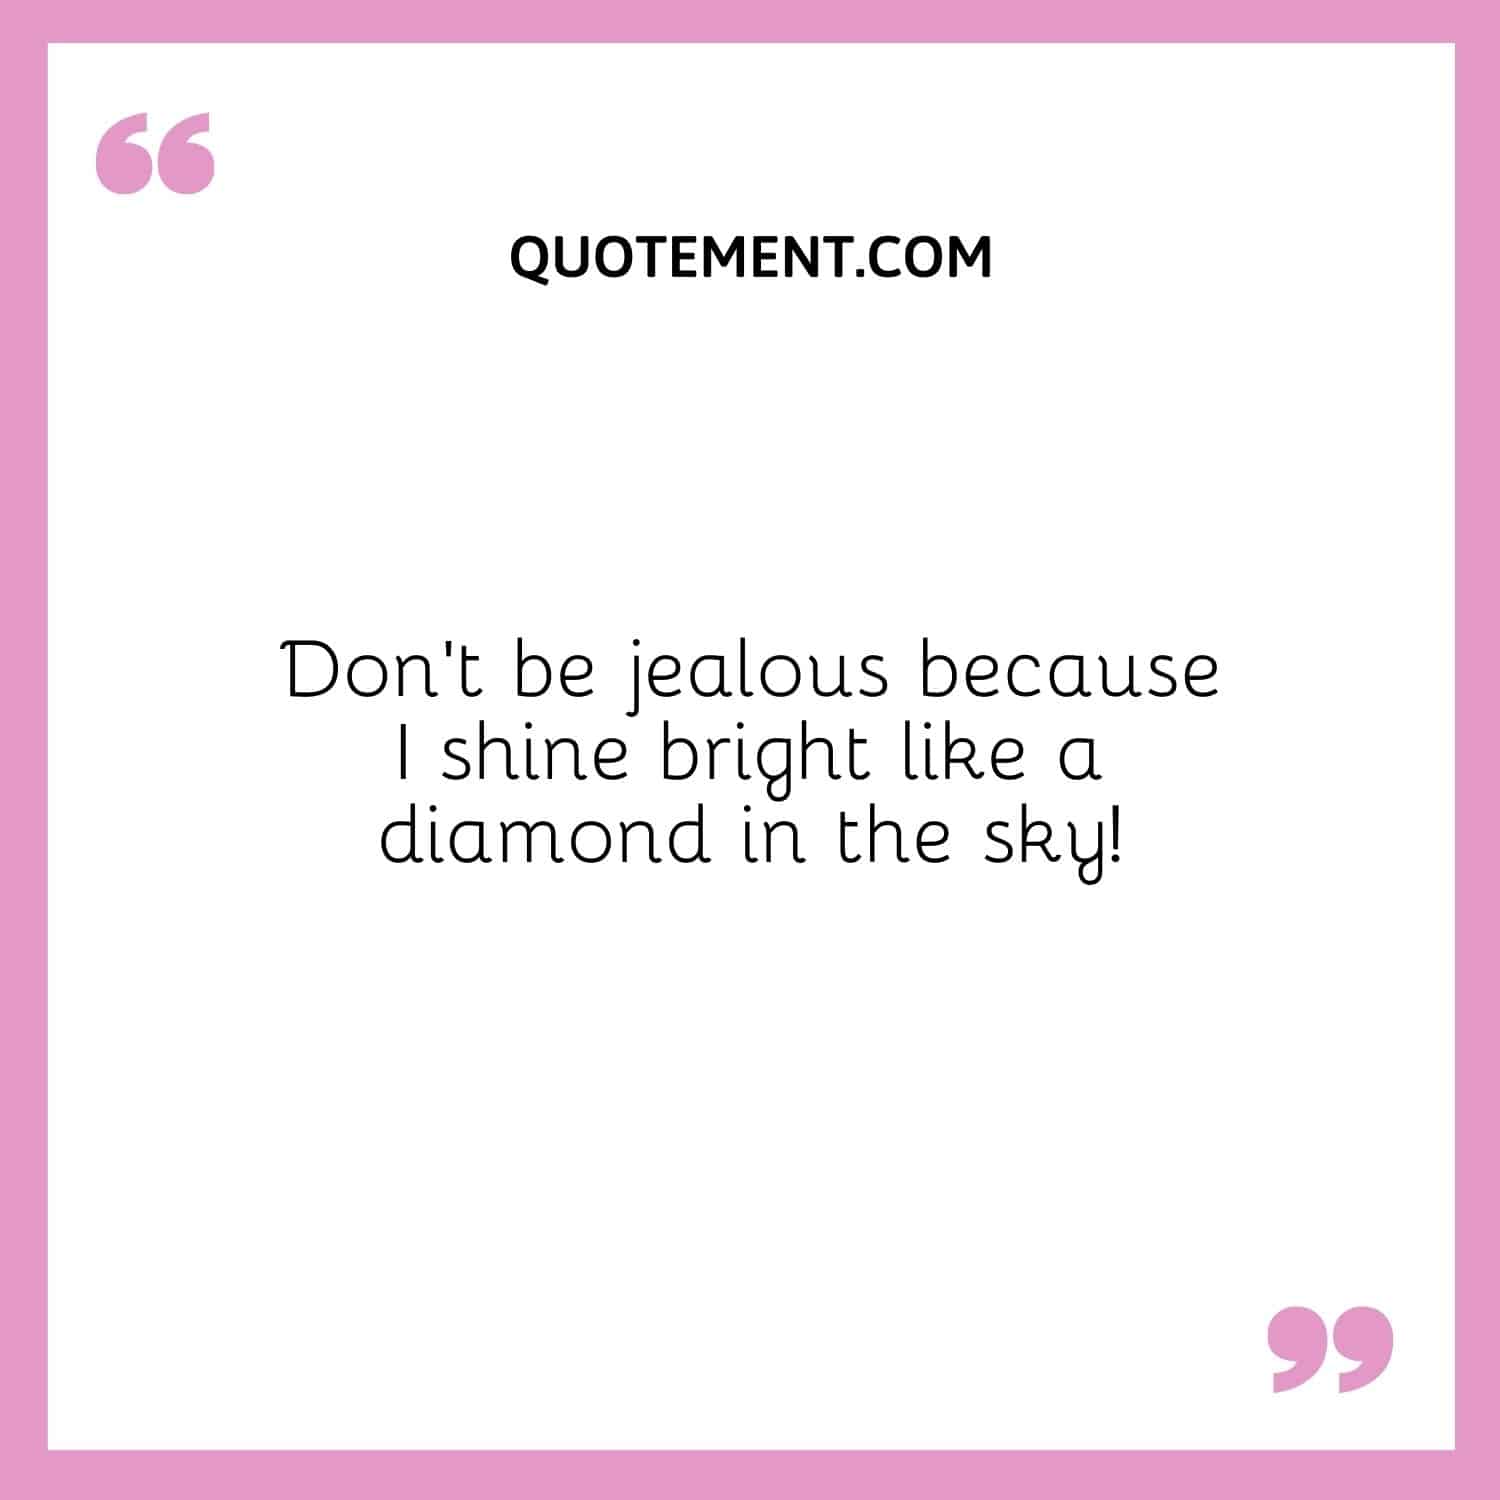 Don’t be jealous because I shine bright like a diamond in the sky!